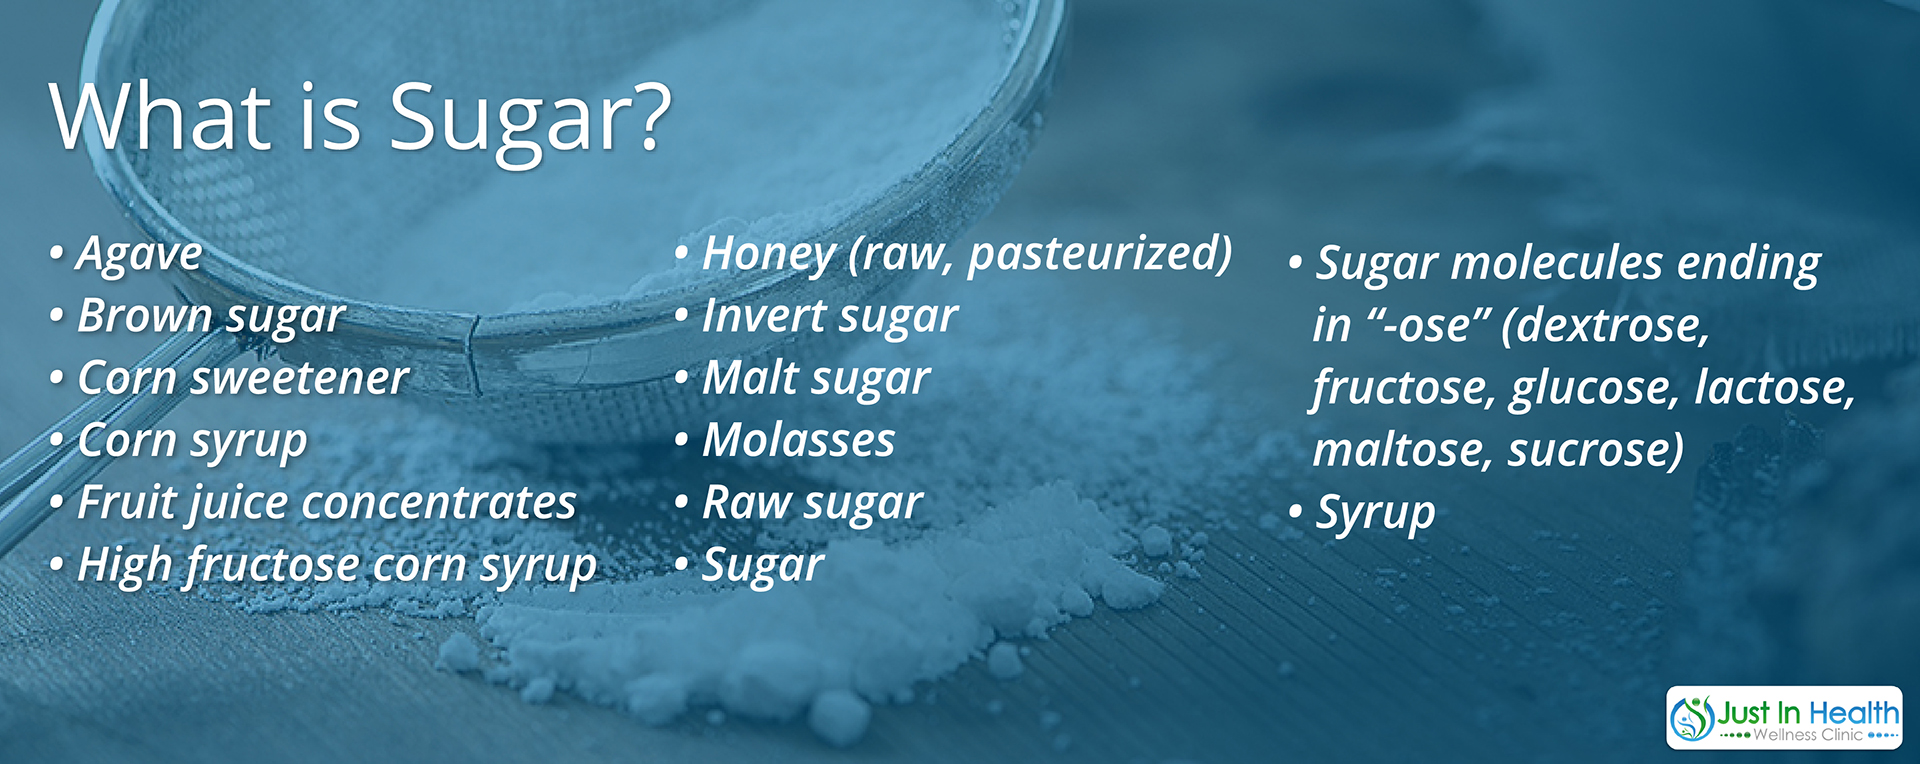 What is Sugar